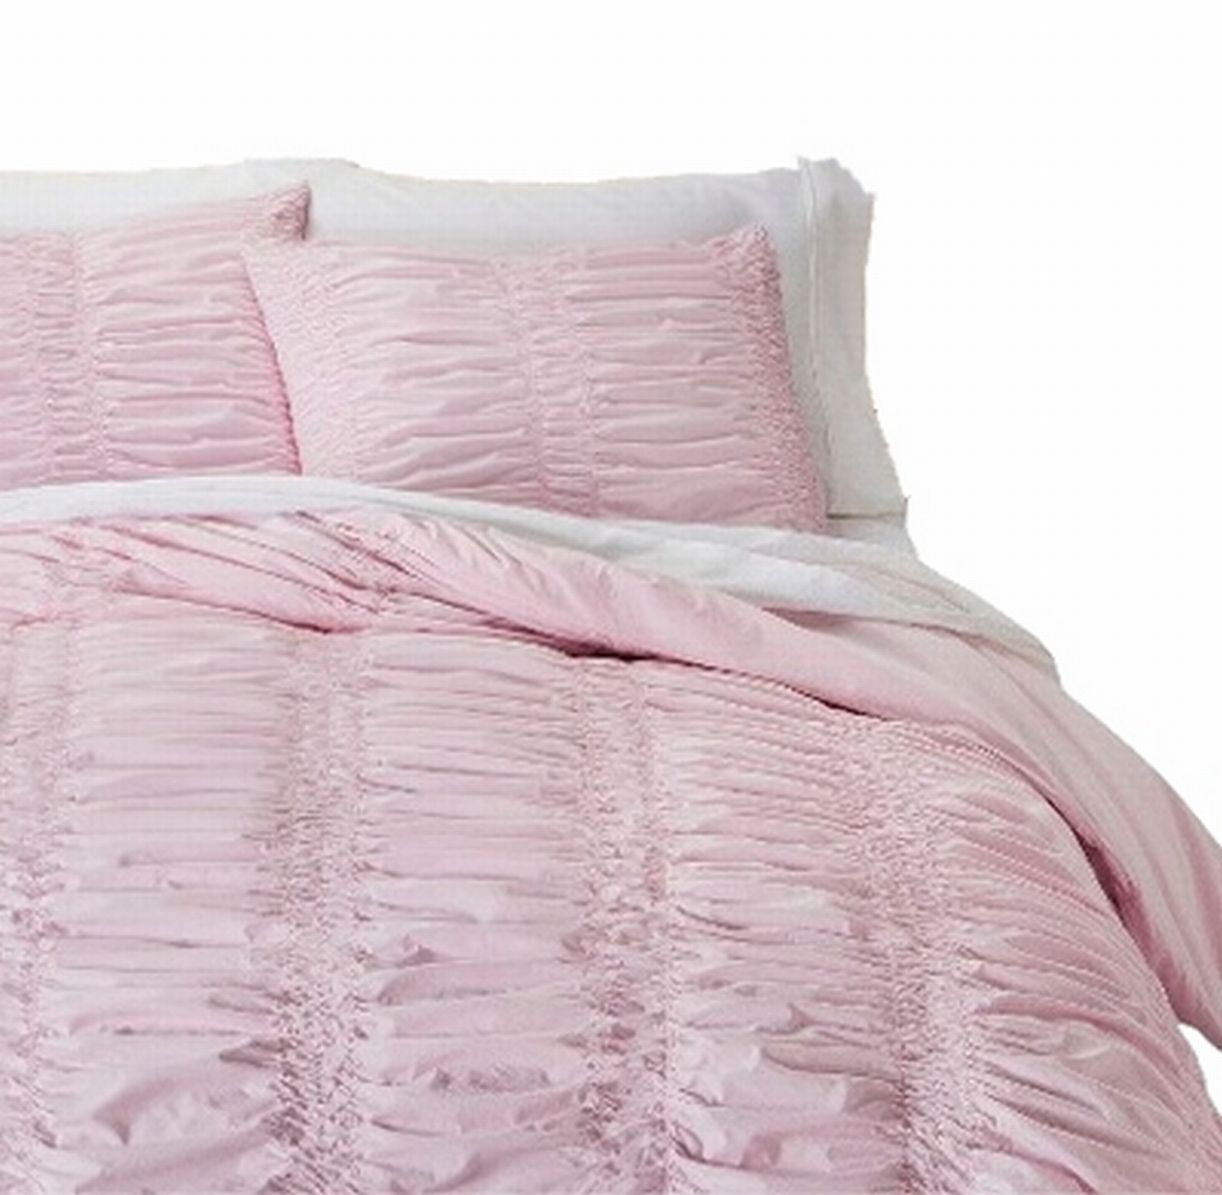 Simply Shabby Chic Pink Ruched Pc Duvet Cover Set King Size Bedding